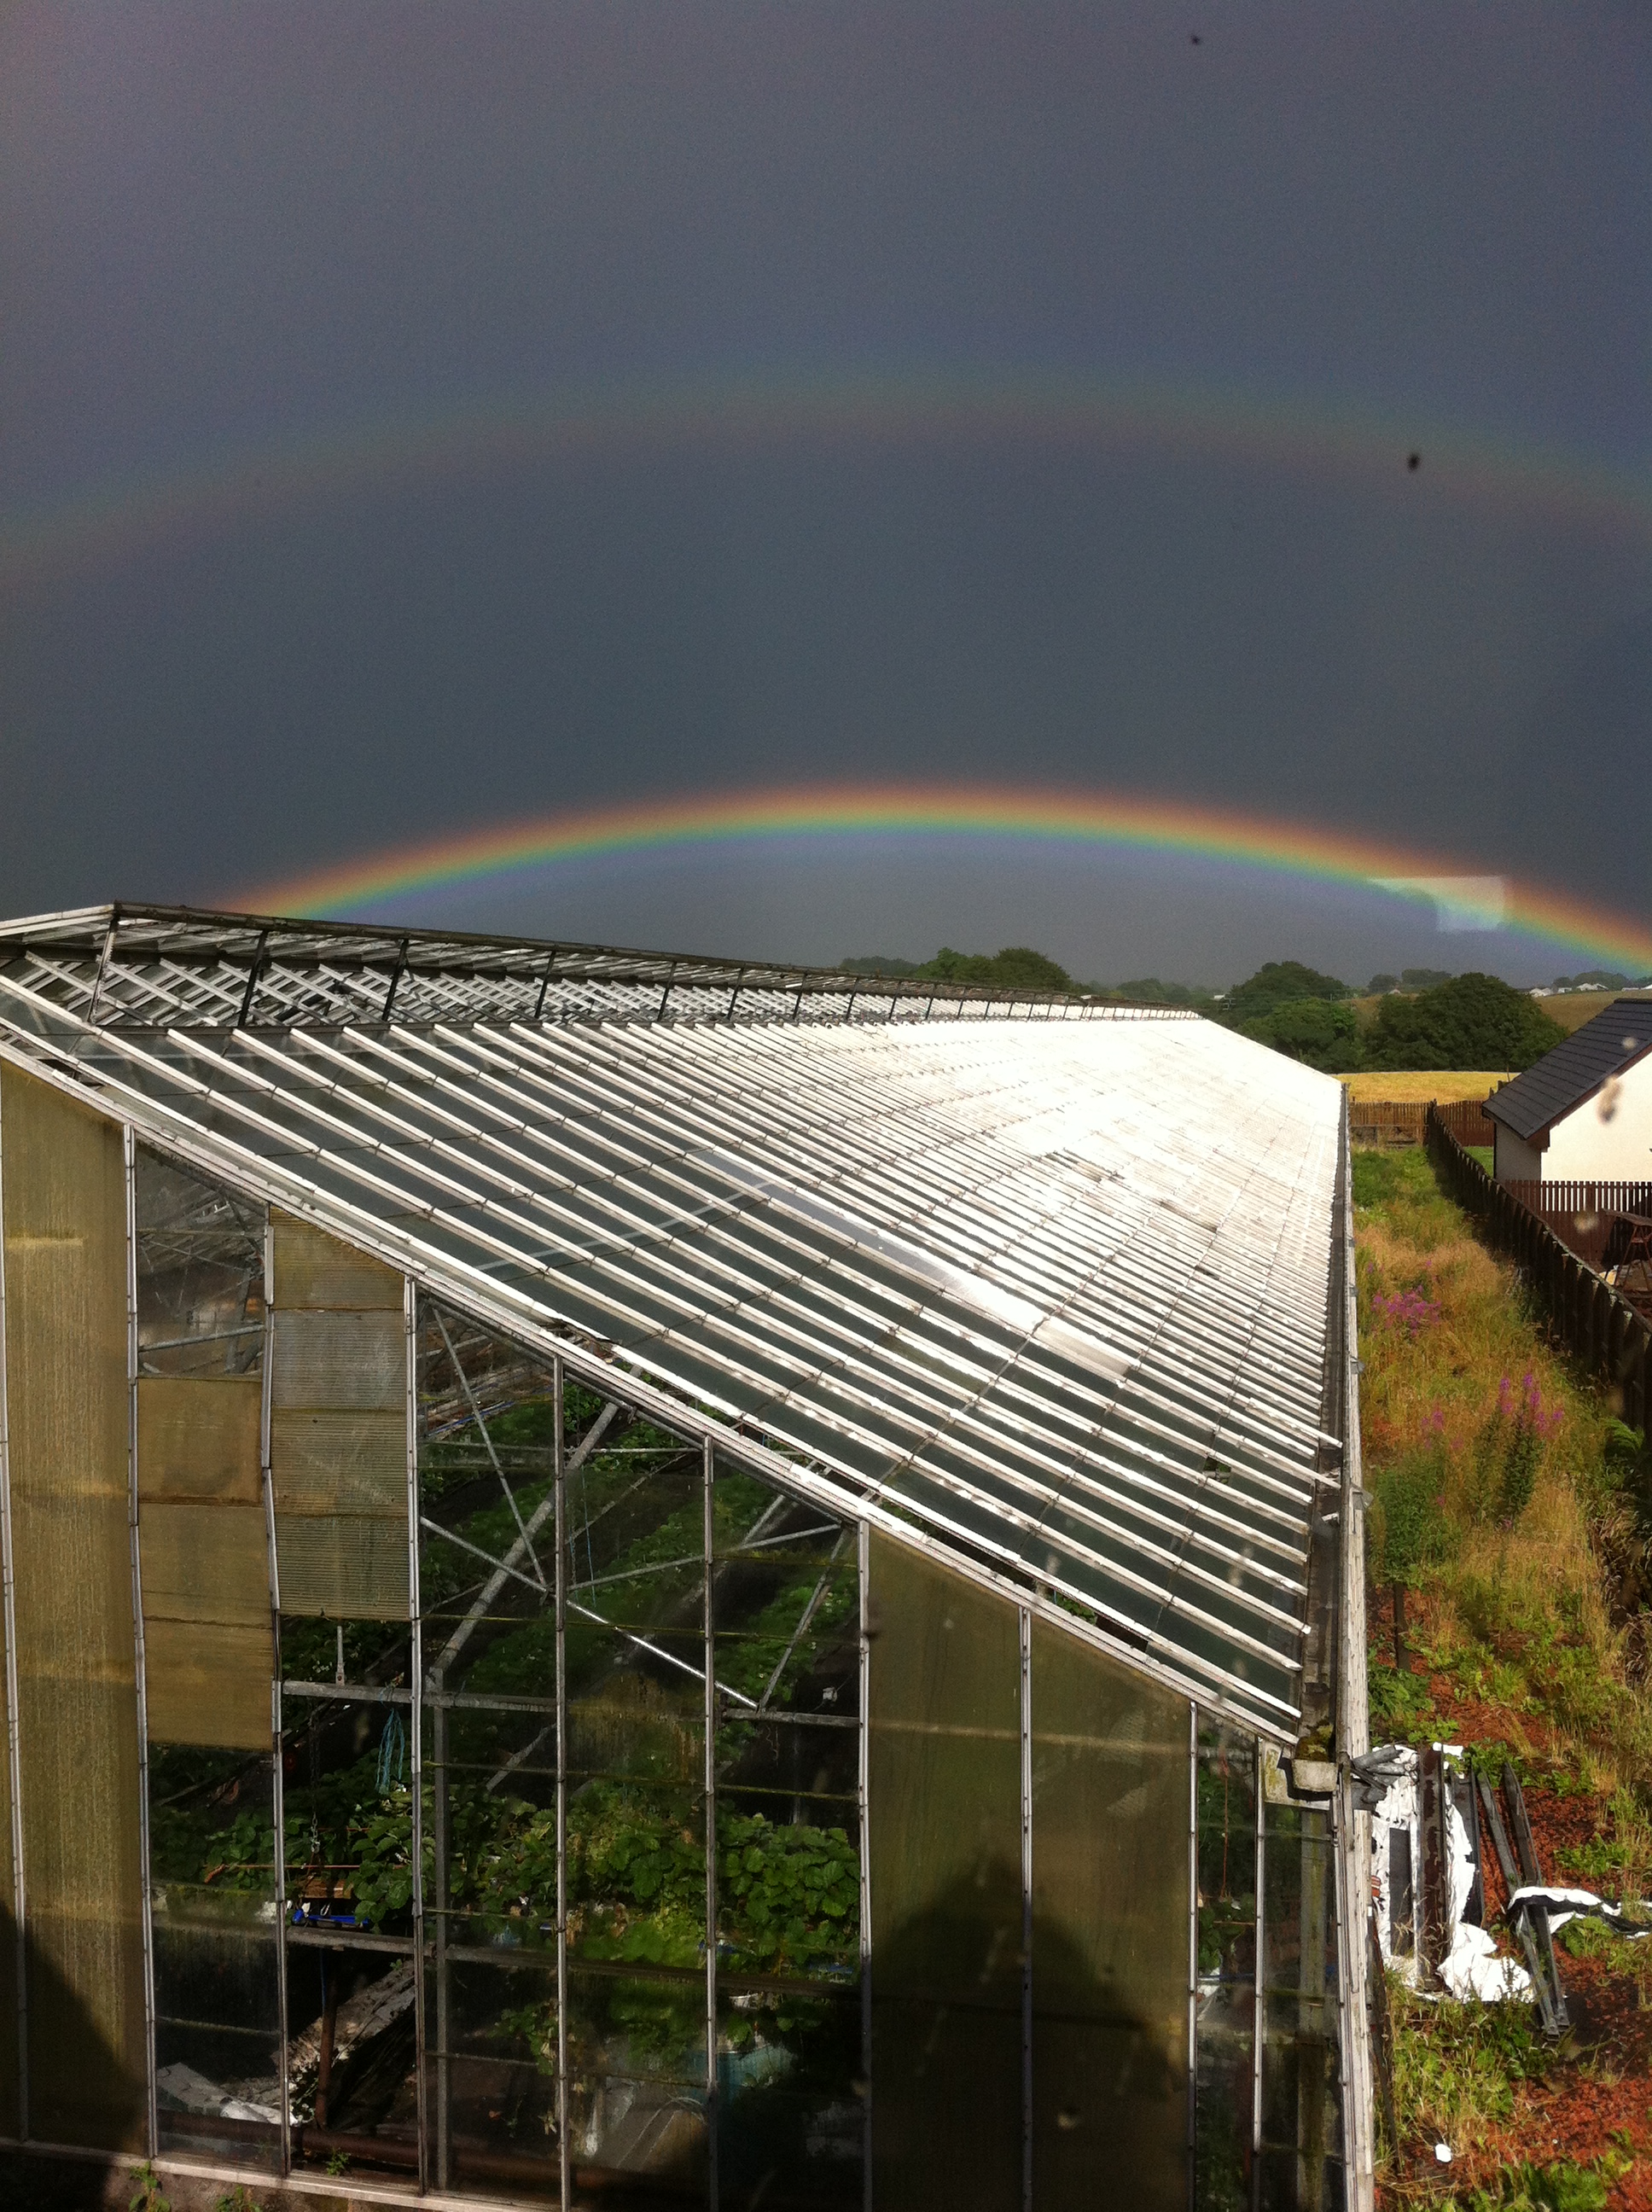 Glass greenhouse with rainbow in background.